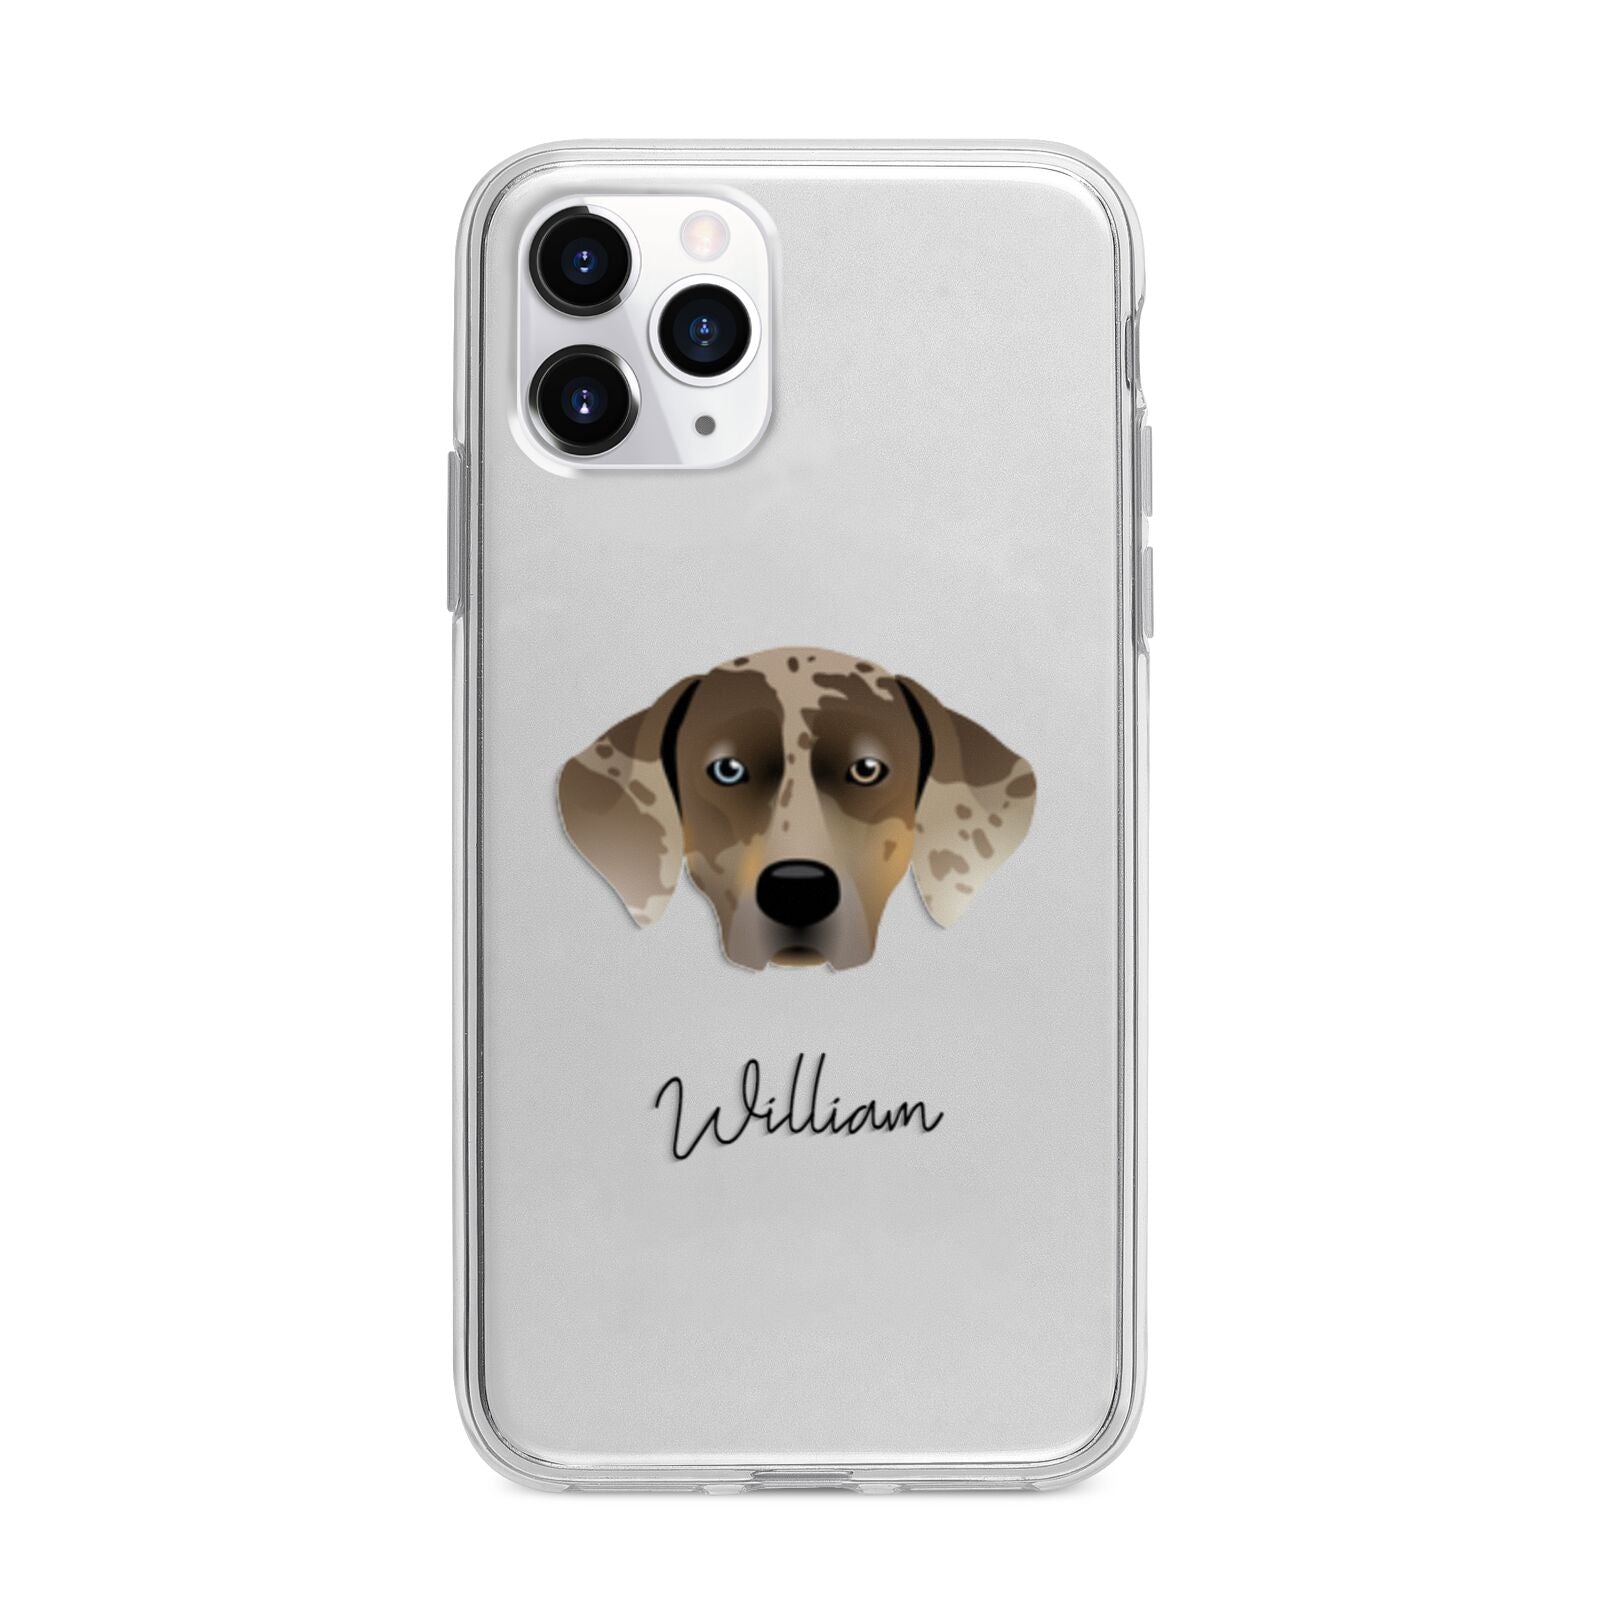 Catahoula Leopard Dog Personalised Apple iPhone 11 Pro Max in Silver with Bumper Case